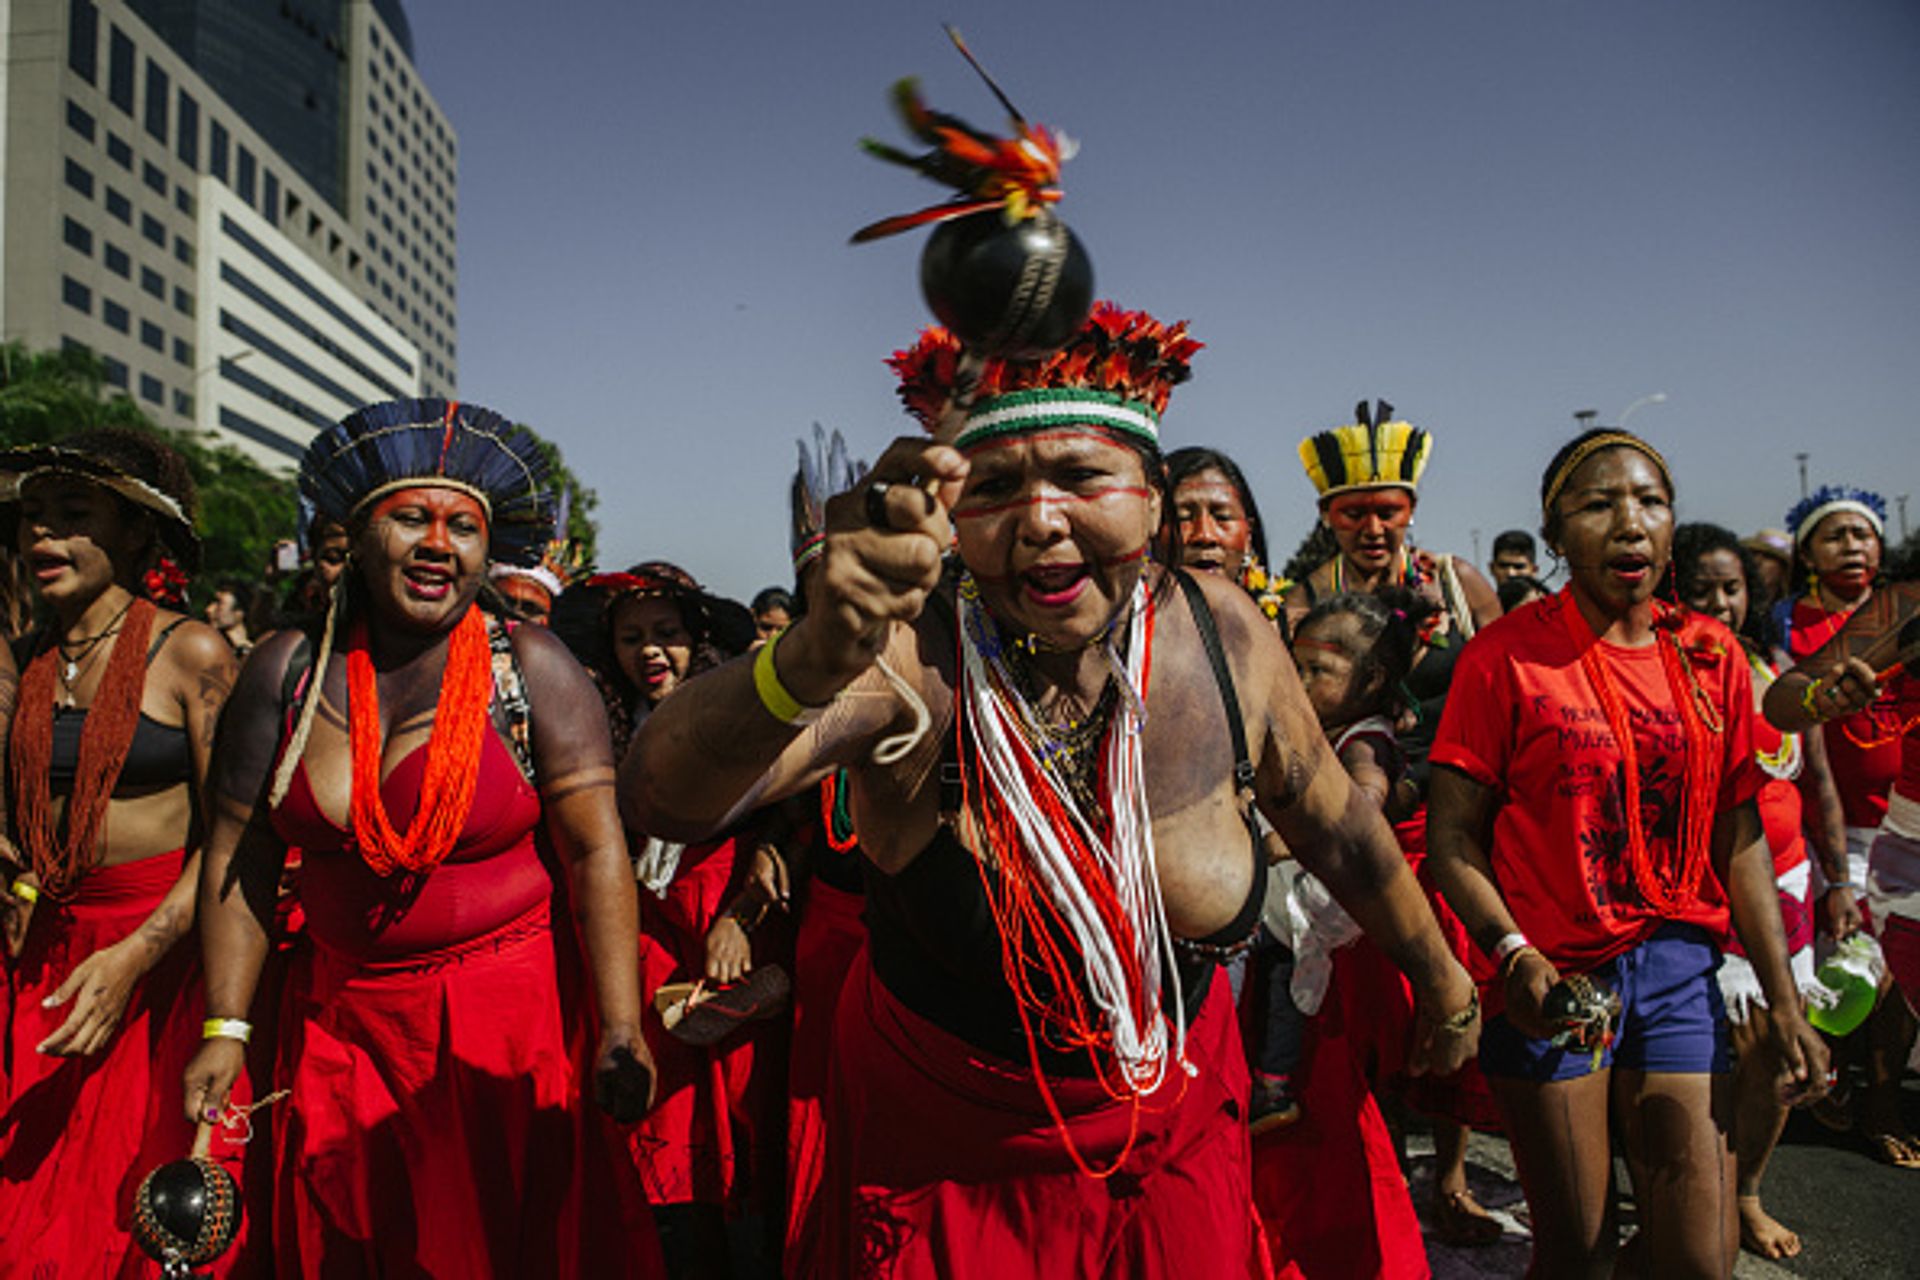 Indigenous women taking part in a protest against right-wing President Bolsonaro Photo: Tuane Fernandes/picture alliance via Getty Images